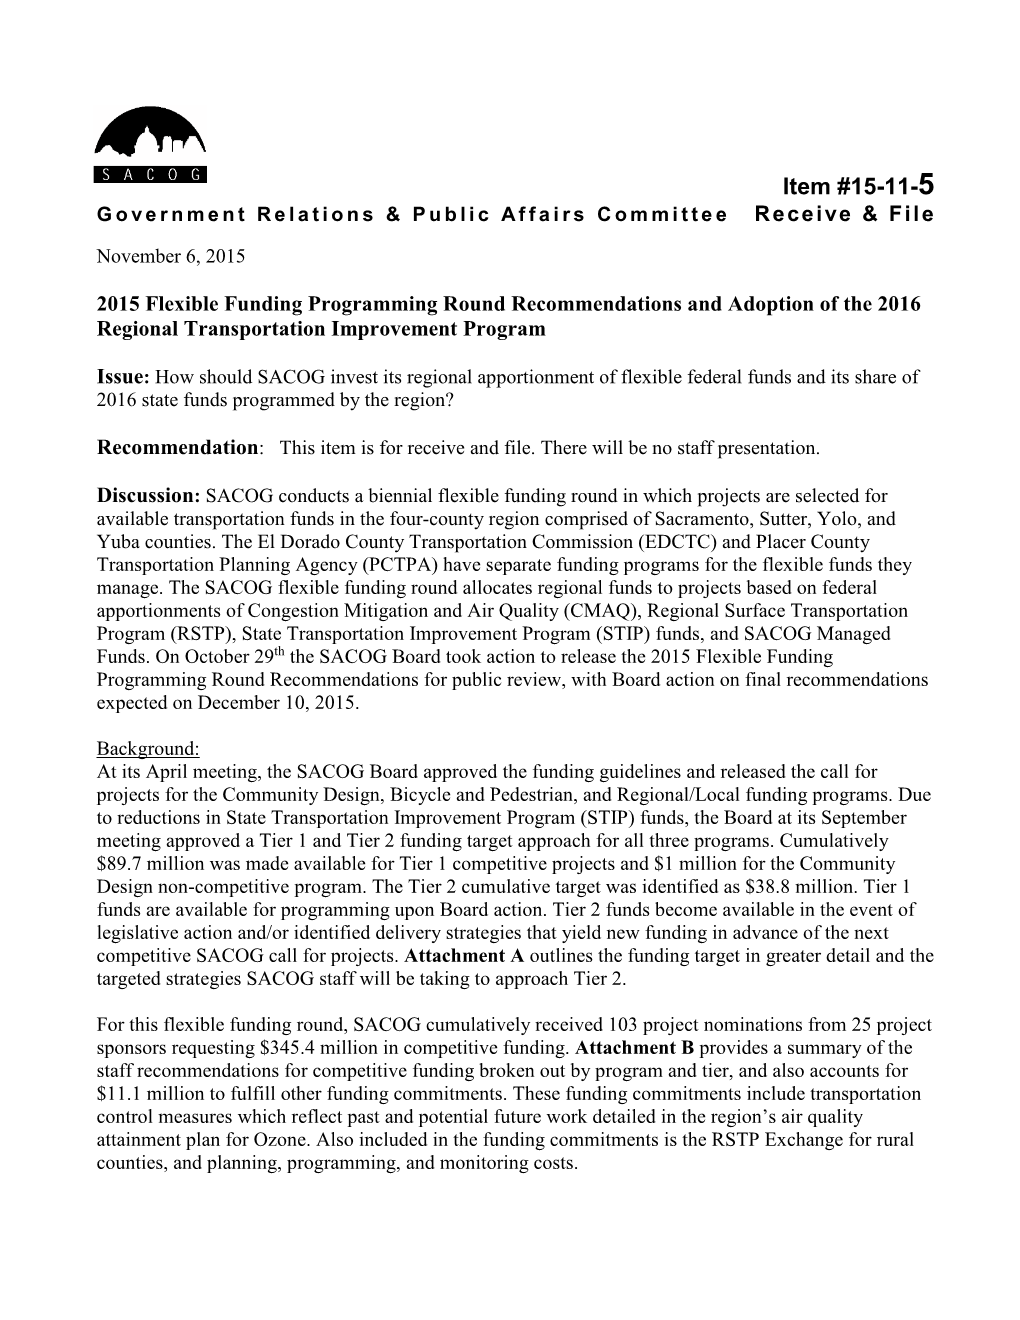 Item #15-11-5 Government Relations & Public Affairs Committee Receive & File November 6, 2015